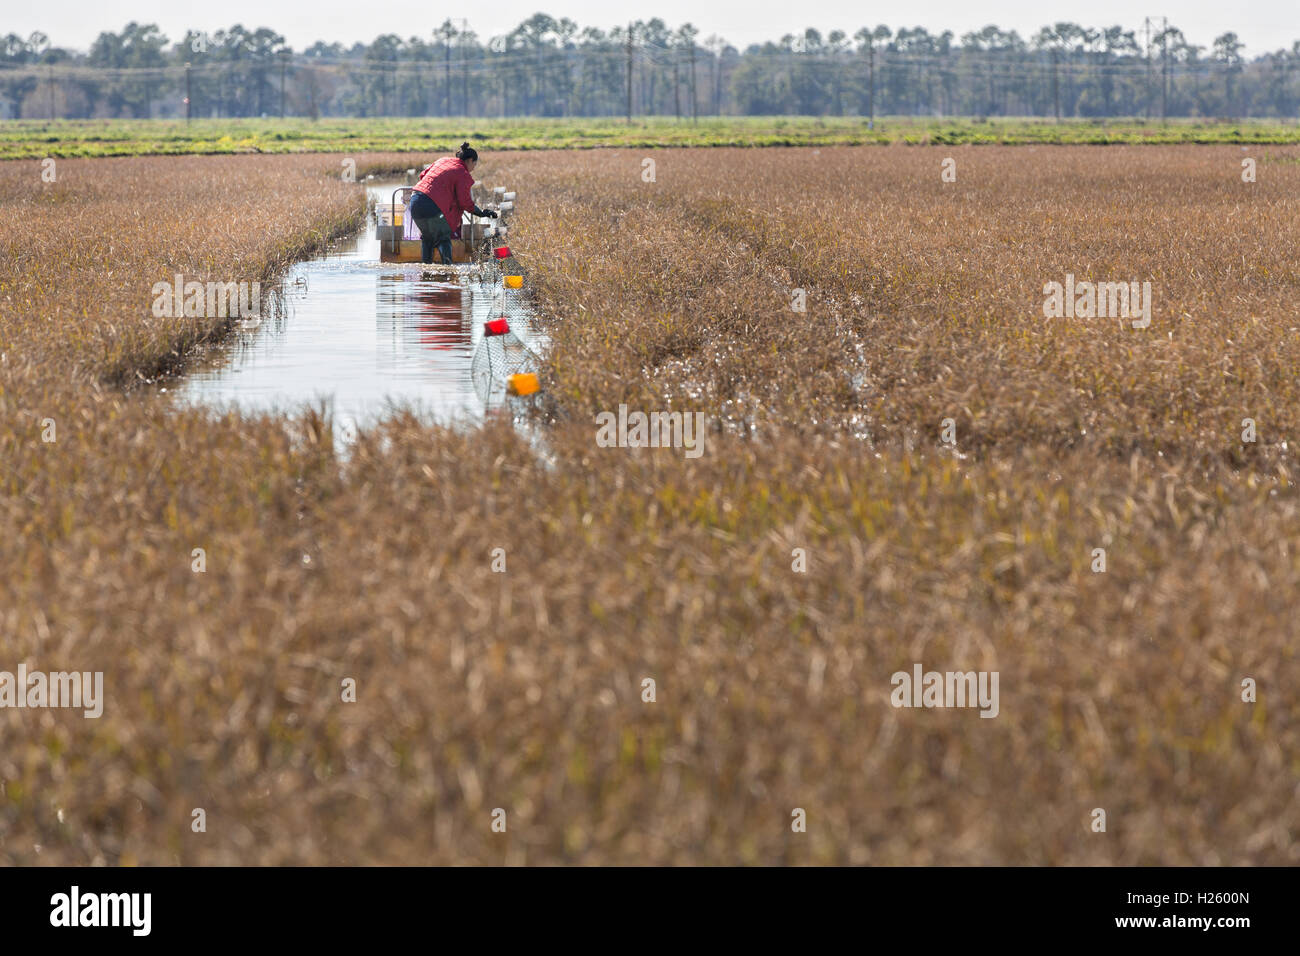 In Louisiana, Farmers Use Rice Fields as Crayfish Ponds - The New